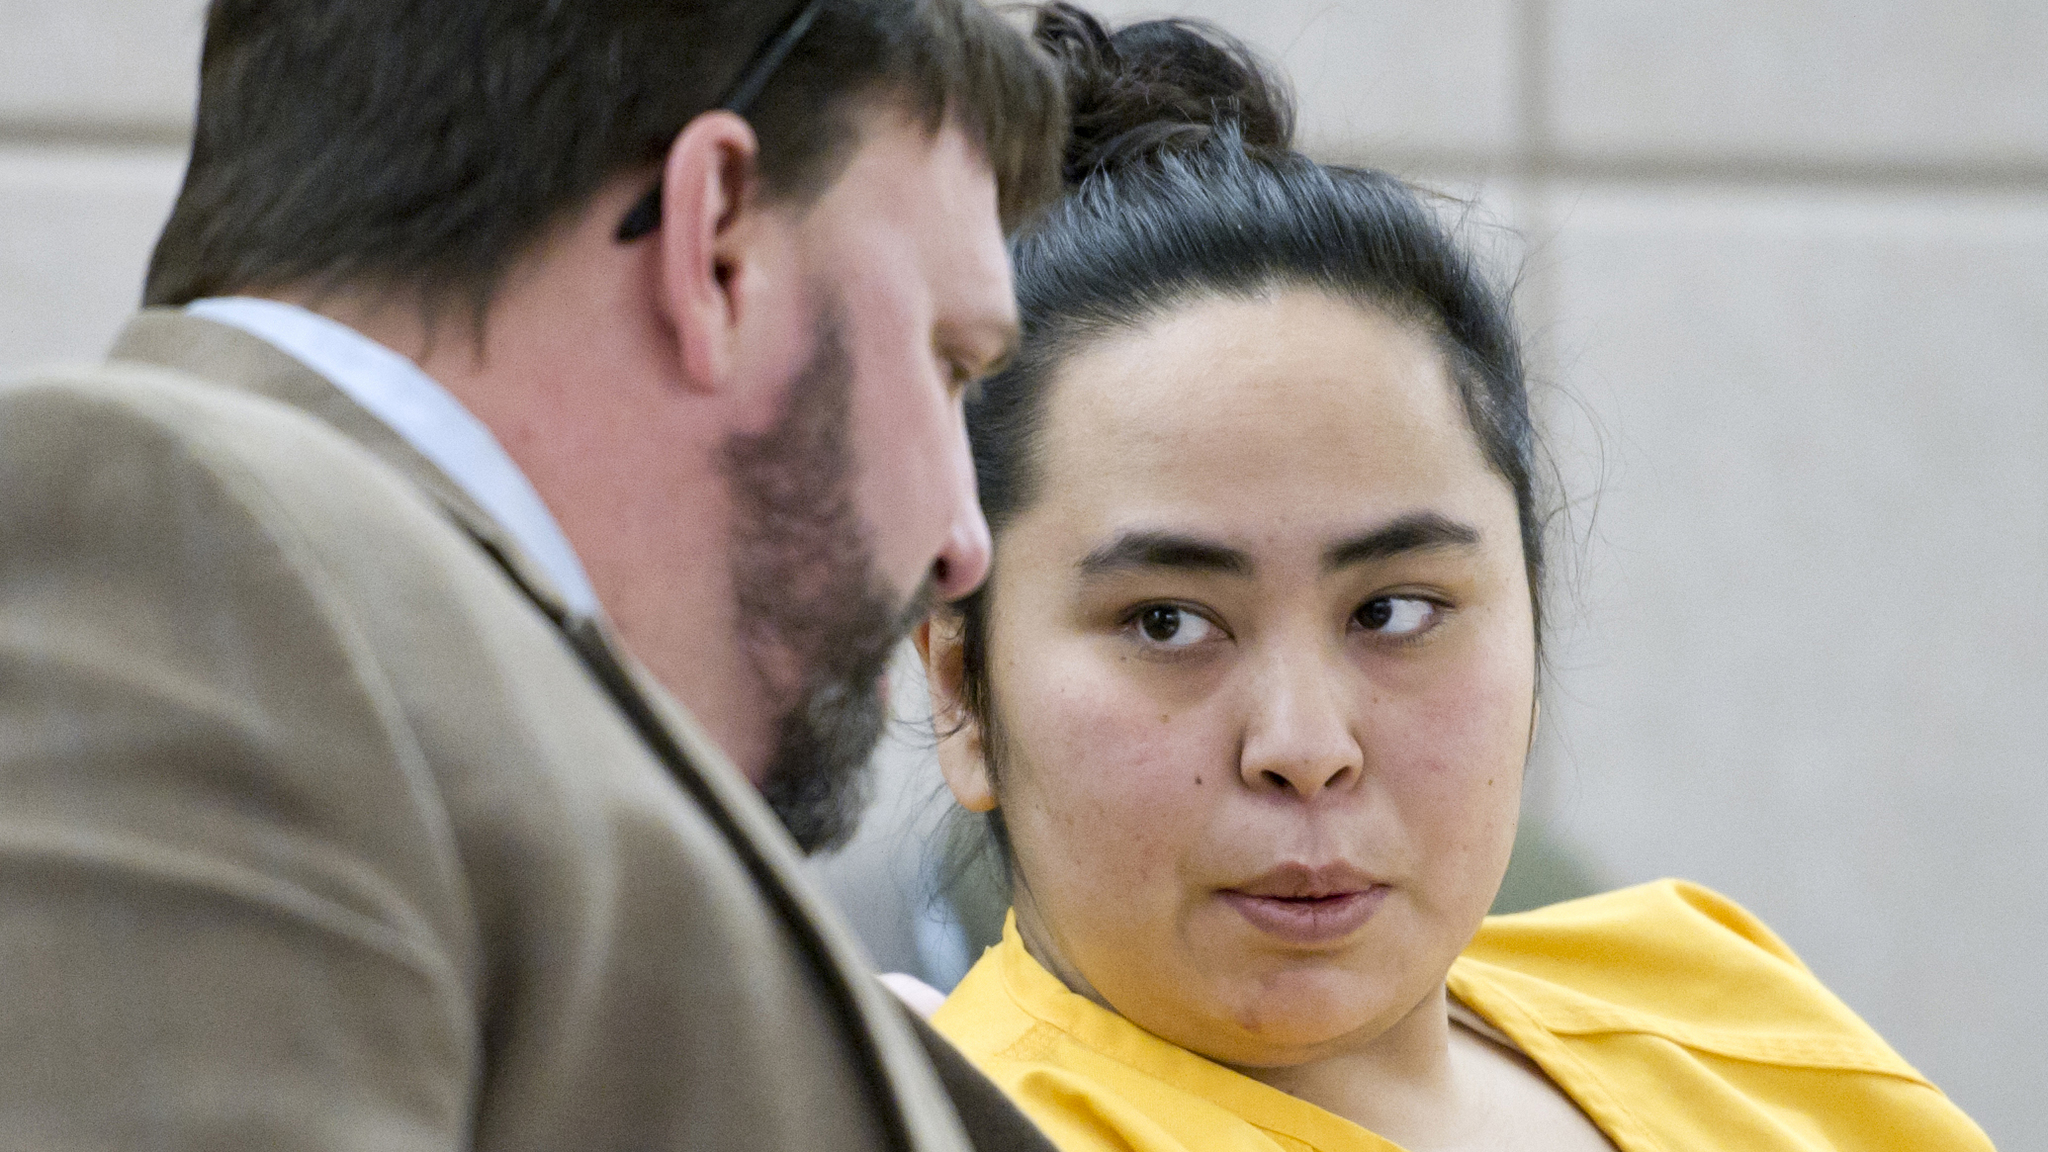 In this Feb. 9, 2016 file photo, Nora E. Thomas speaks to Assistant Public Defender Eric Hedland during her arraignment in Juneau Superior Court on Tuesday for the death of 50-year-old Christopher K. Kenney in 2014. (Michael Penn | Juneau Empire File)